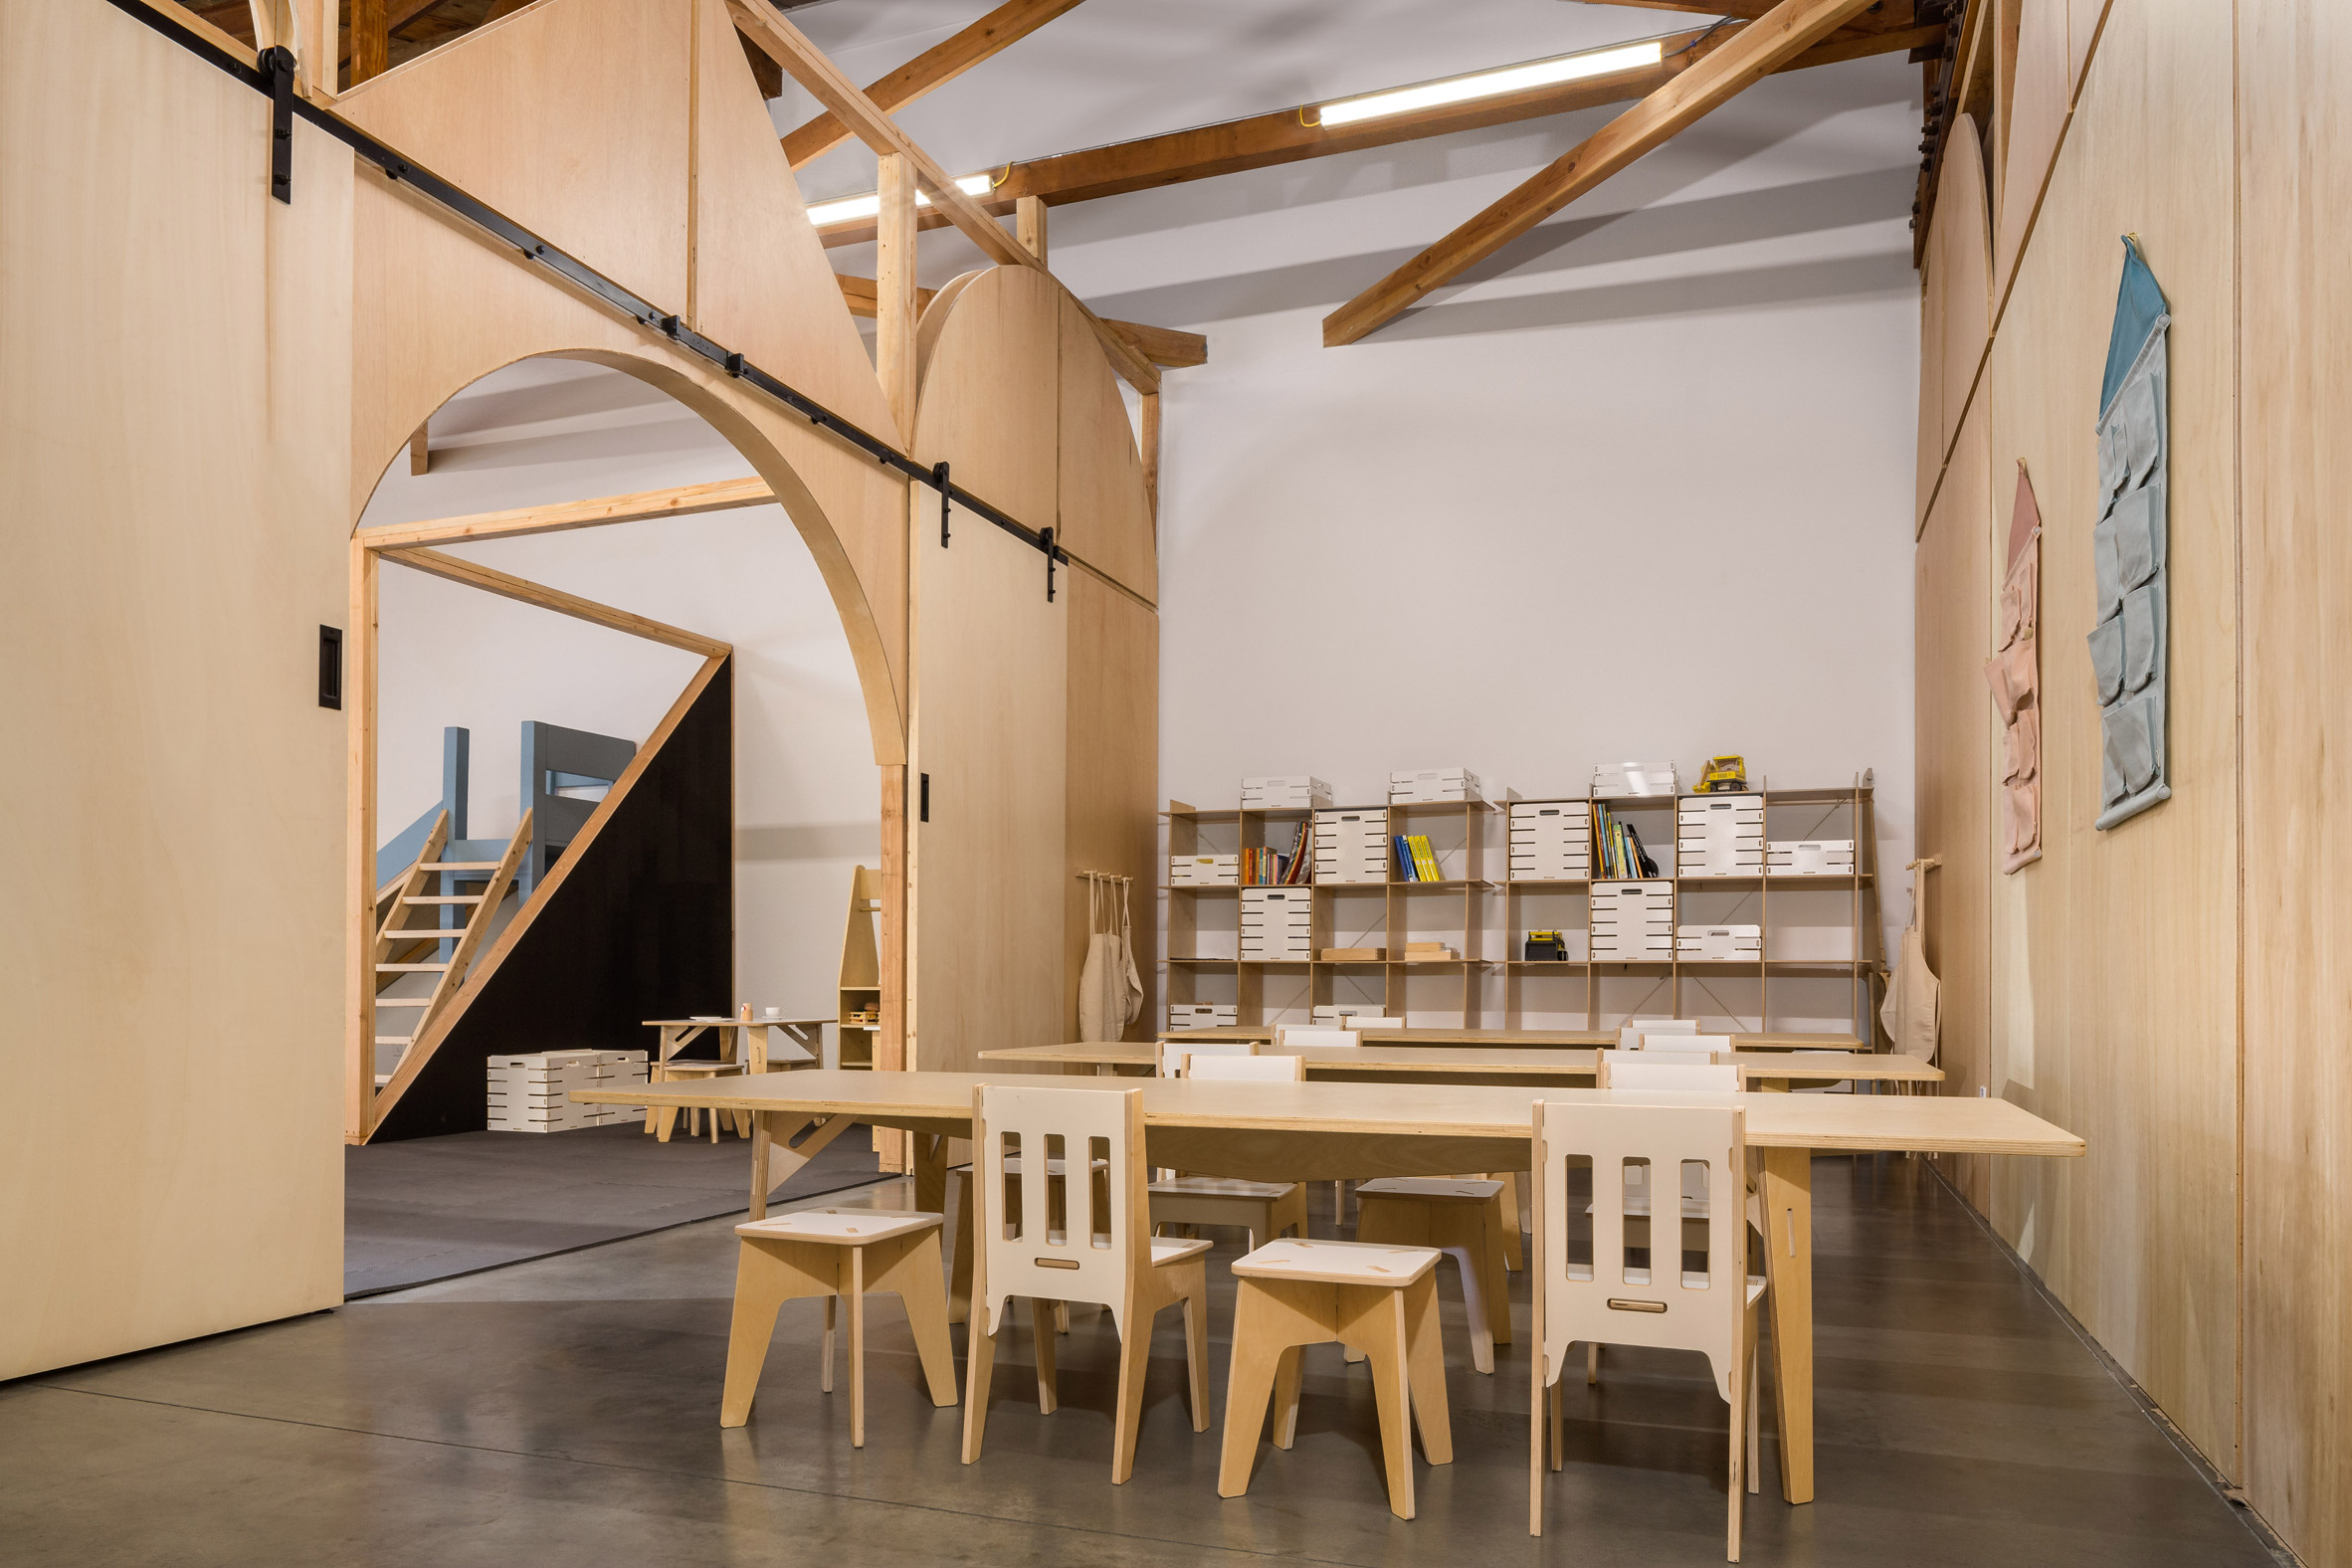 Big and Tiny co-working space and kindergarten by Zooco Estudio